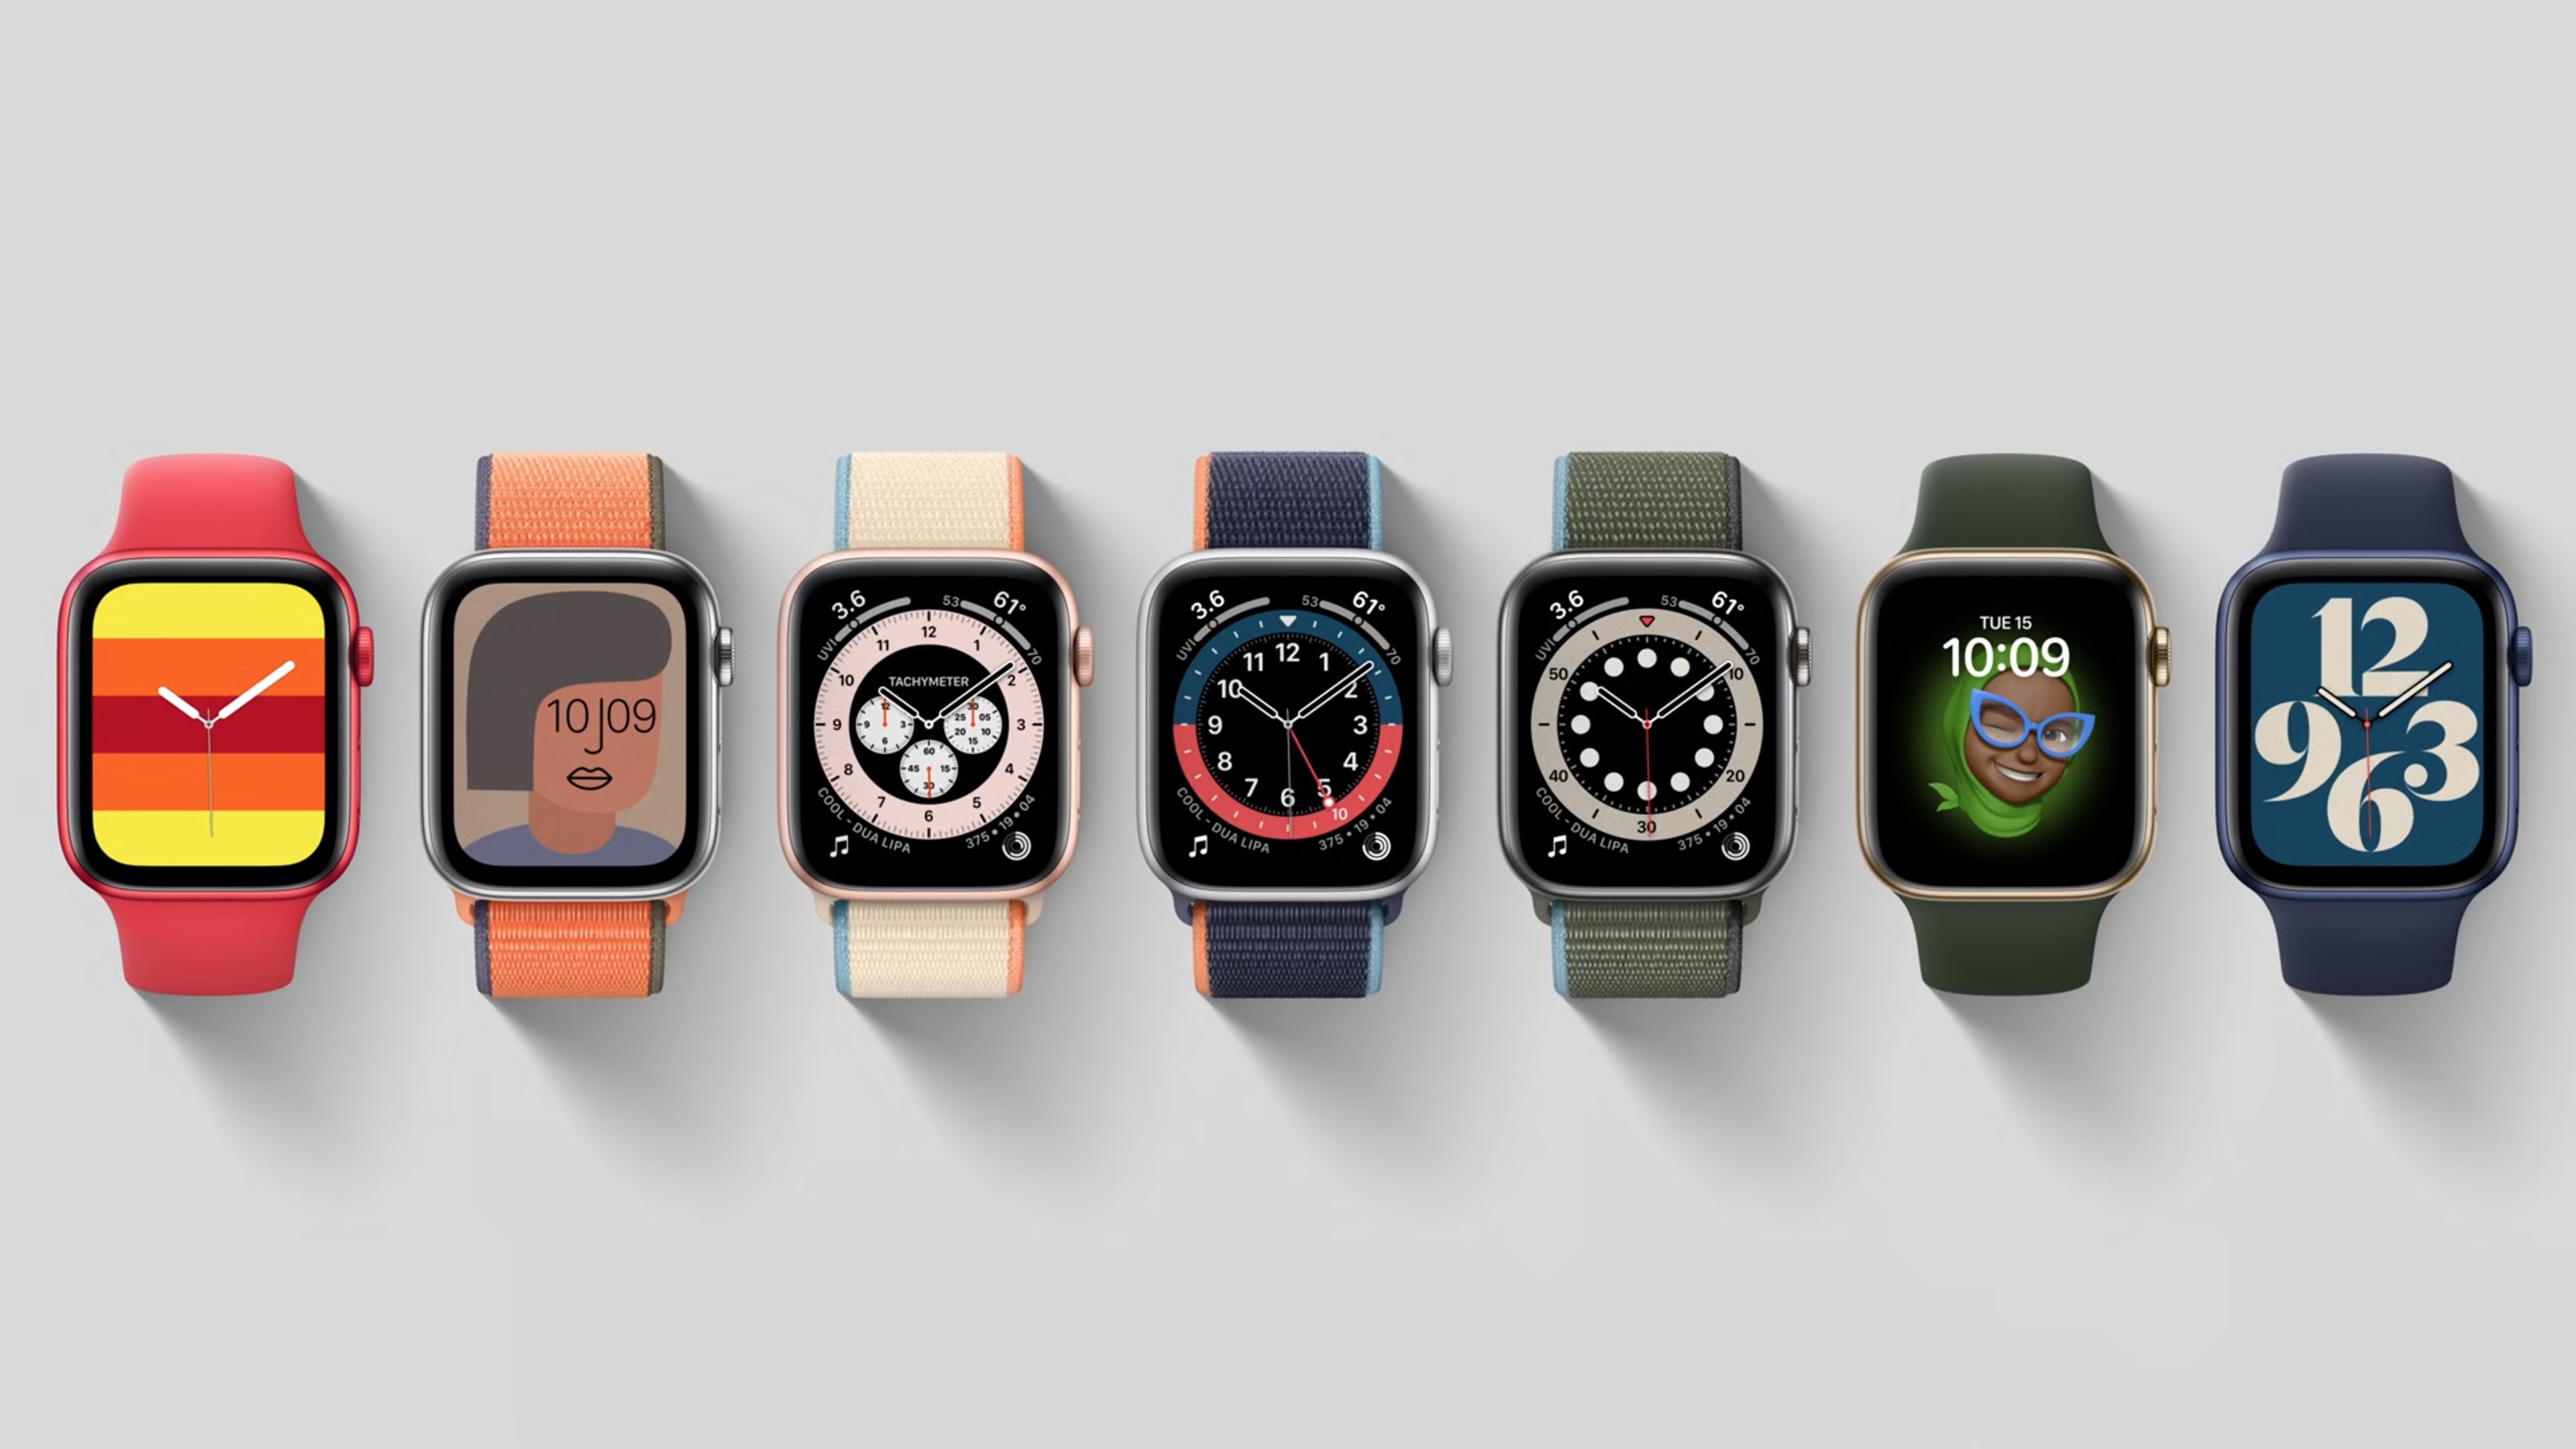 Get ready for new Apple Watch faces!